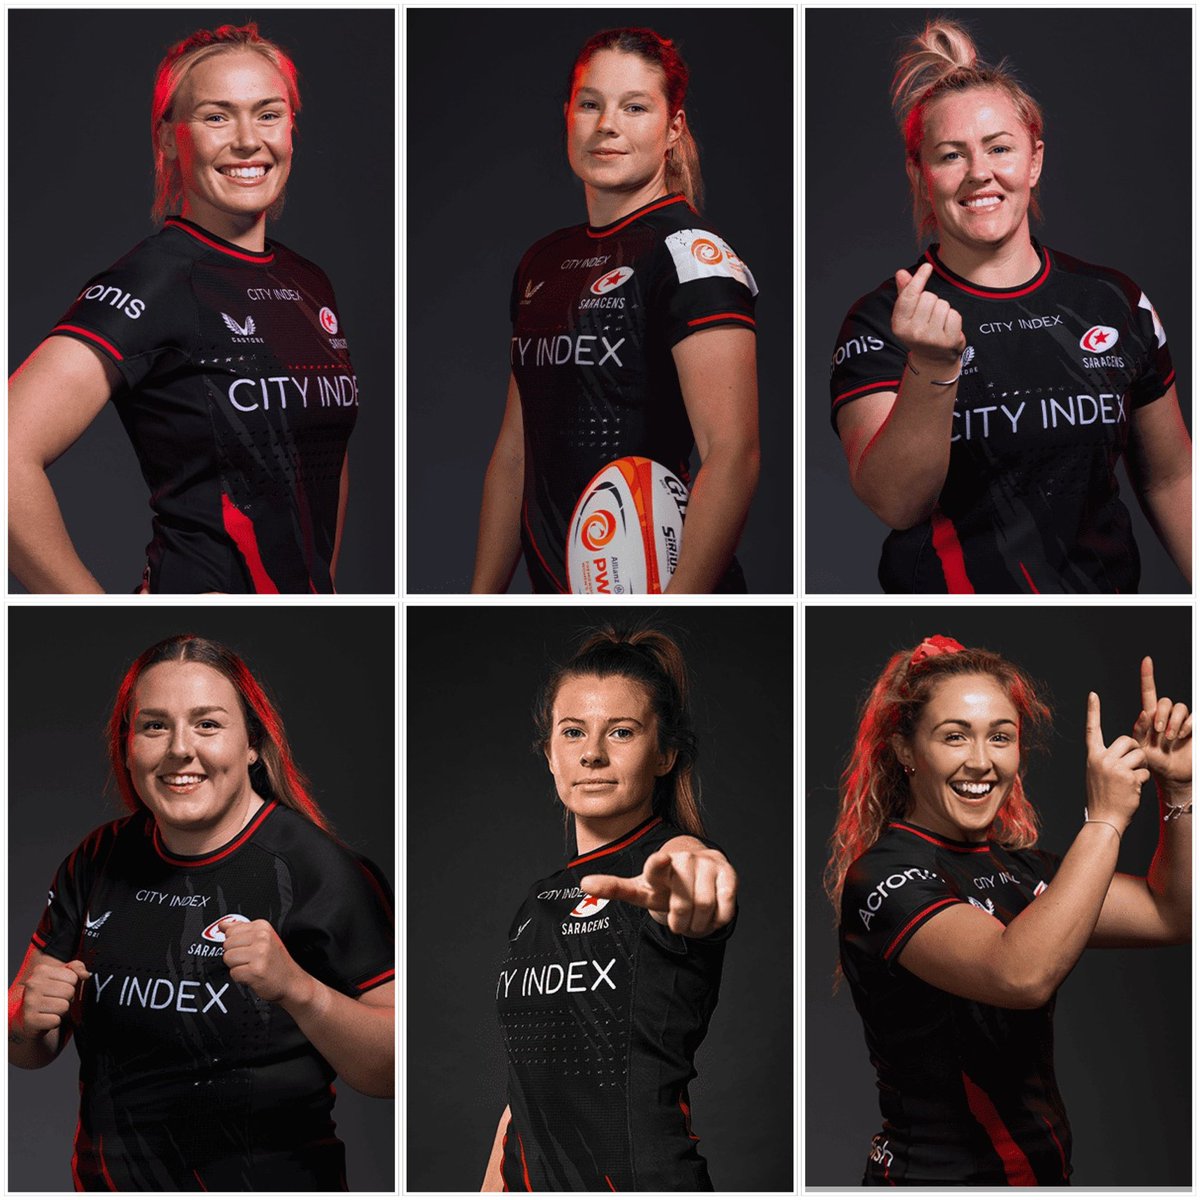 🌹 Congratulations to the super 6️⃣ @SaracensWomen playing for the #RedRoses 🆚 Scotland at a sold-out The Hive stadium on Saturday. Good luck @rosie_galligan @jessbreach @Kelsey_CLIFF0RD @MarliePacker @zoeharrison123 @sydneygregson and all the squad. #SarriesFamily ⚫️🔴